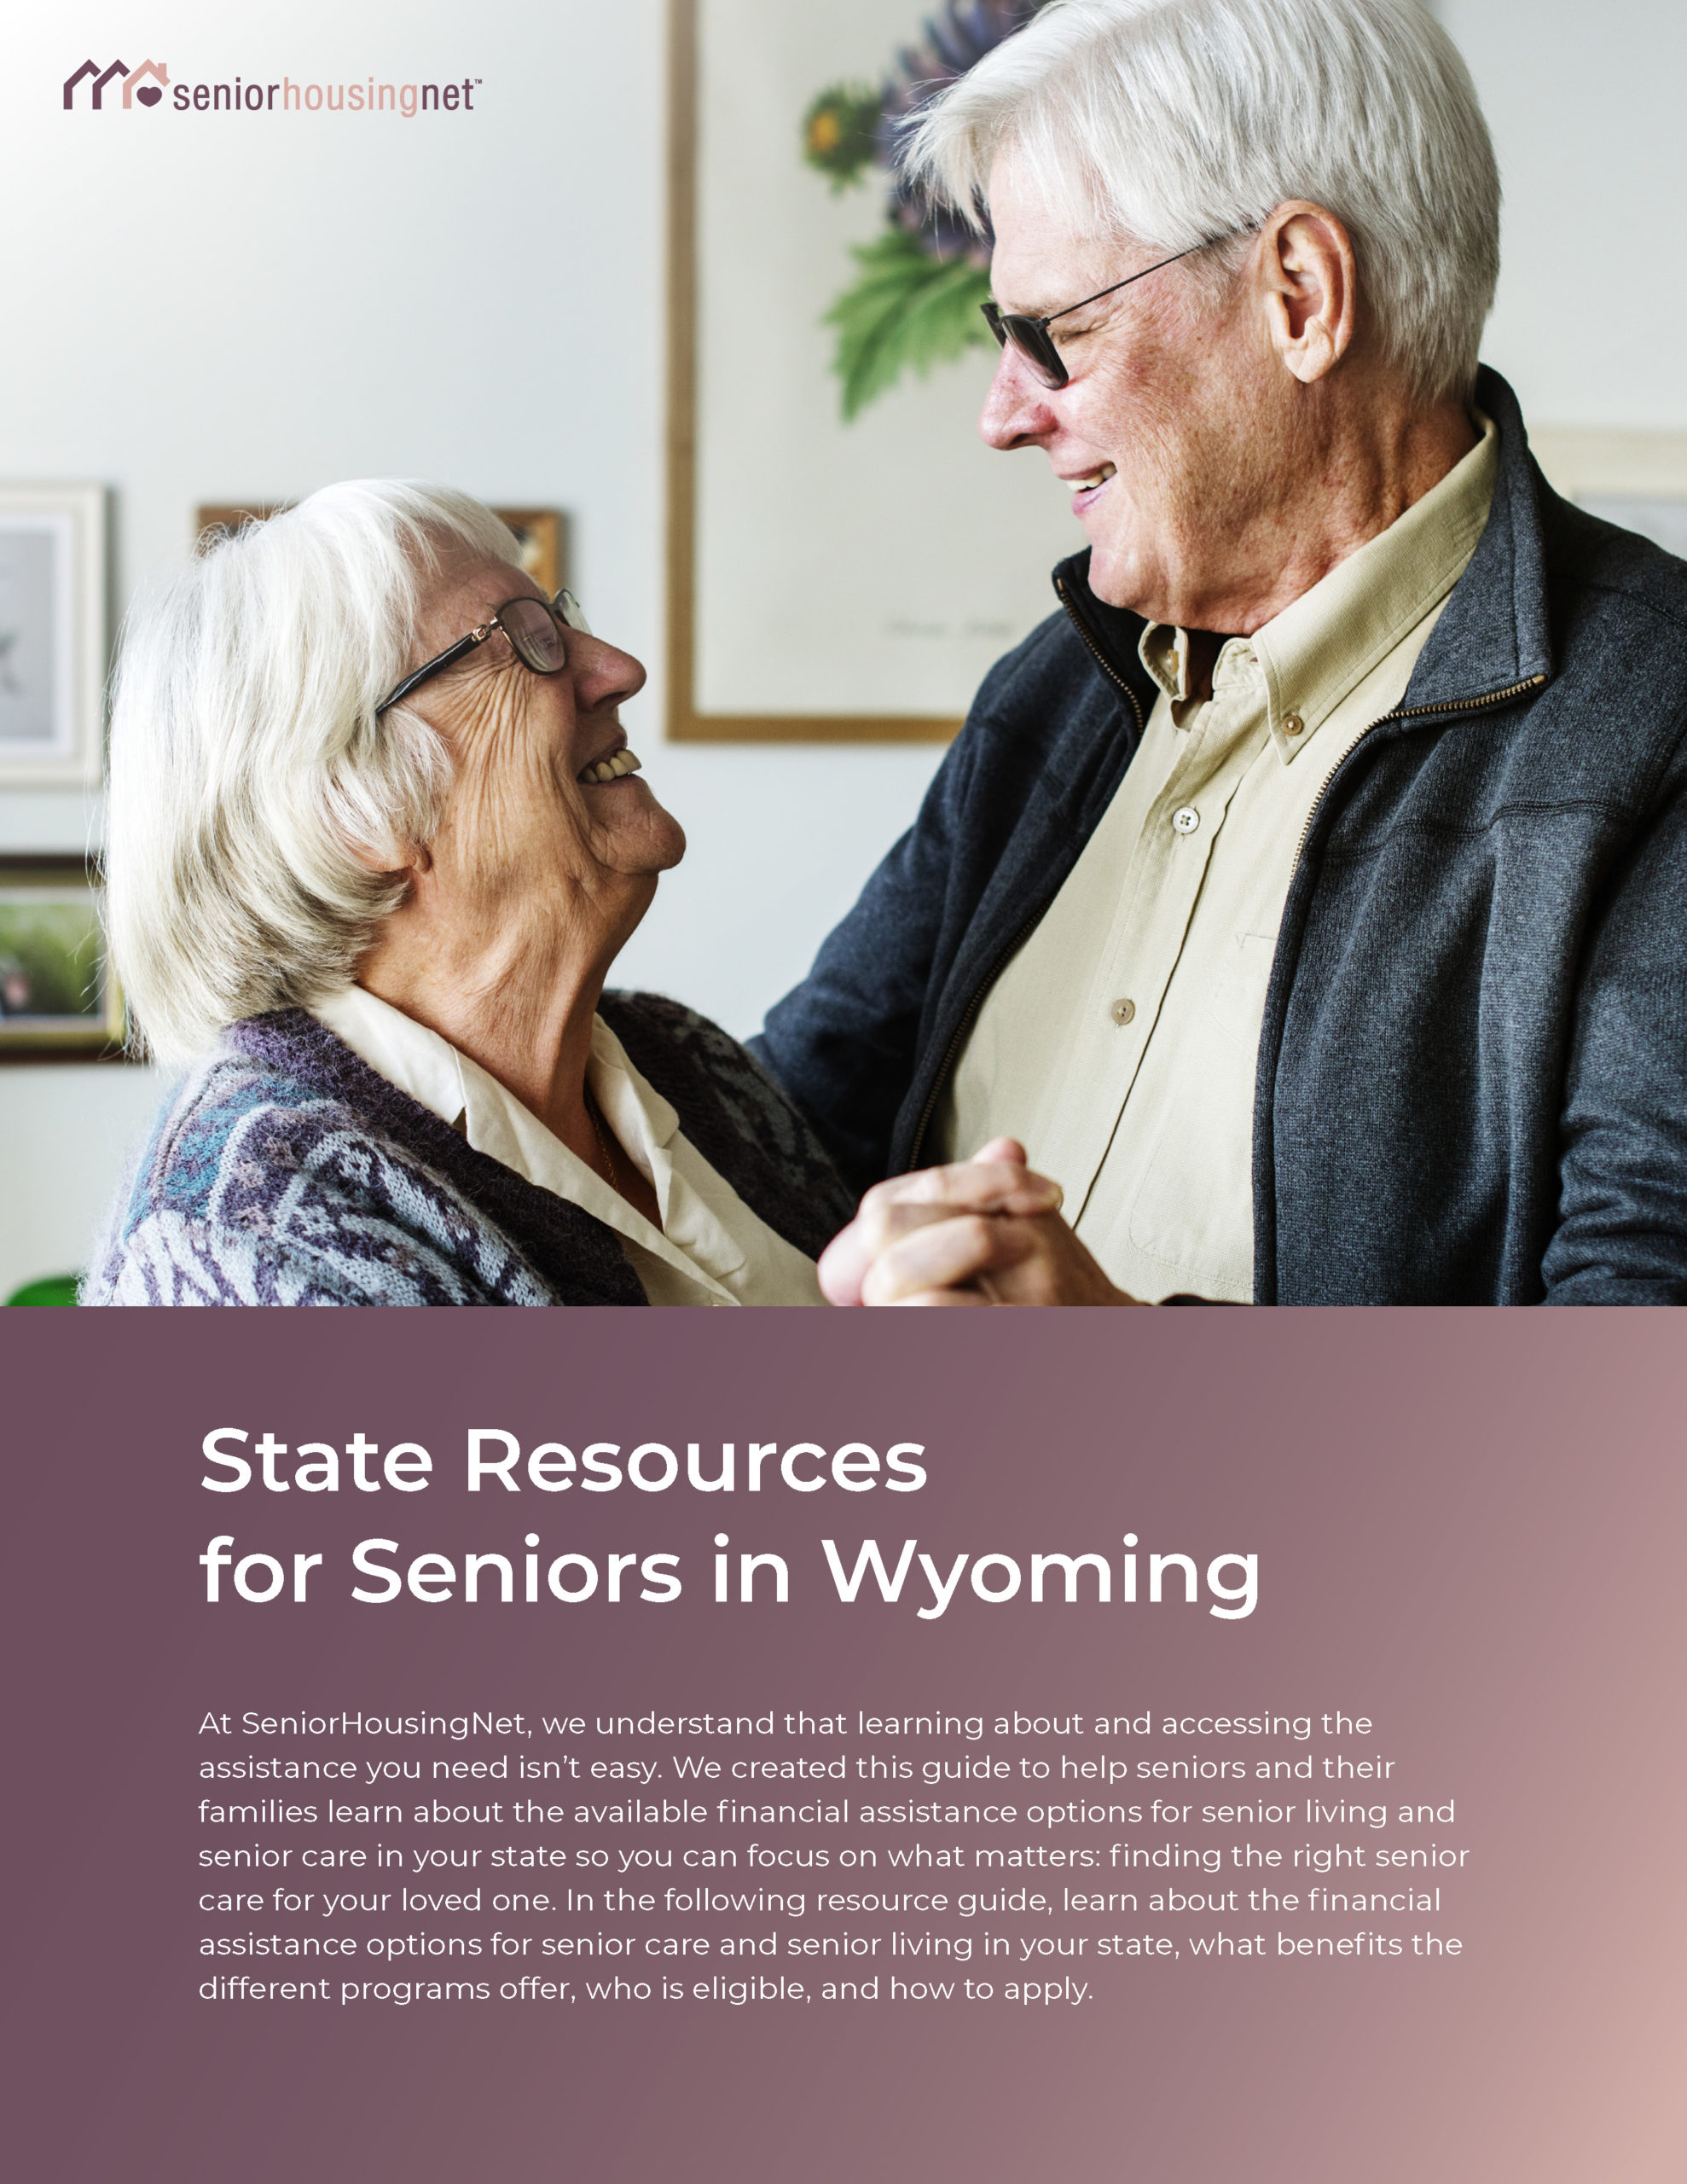 State Resources for Seniors in Wyoming